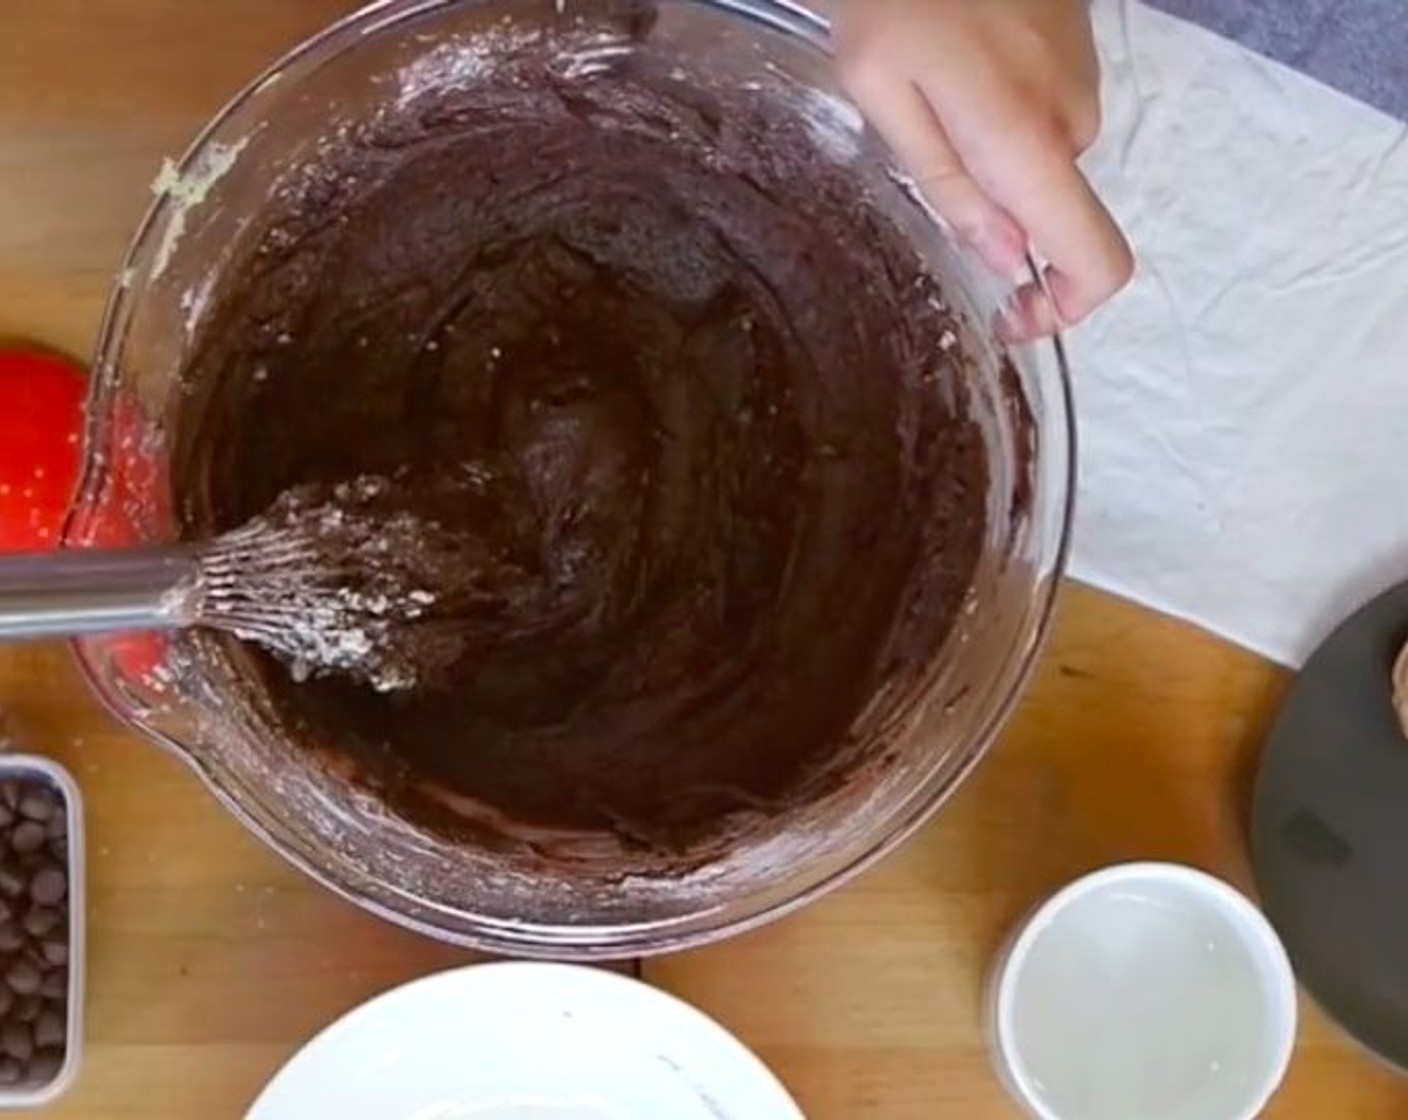 step 8 Stir in All-Purpose Flour (1 2/3 cups), Unsweetened Cocoa Powder (1/3 cup), Baking Powder (1 tsp), and Baking Soda (1 tsp) into the batter, mix on low until just combine.